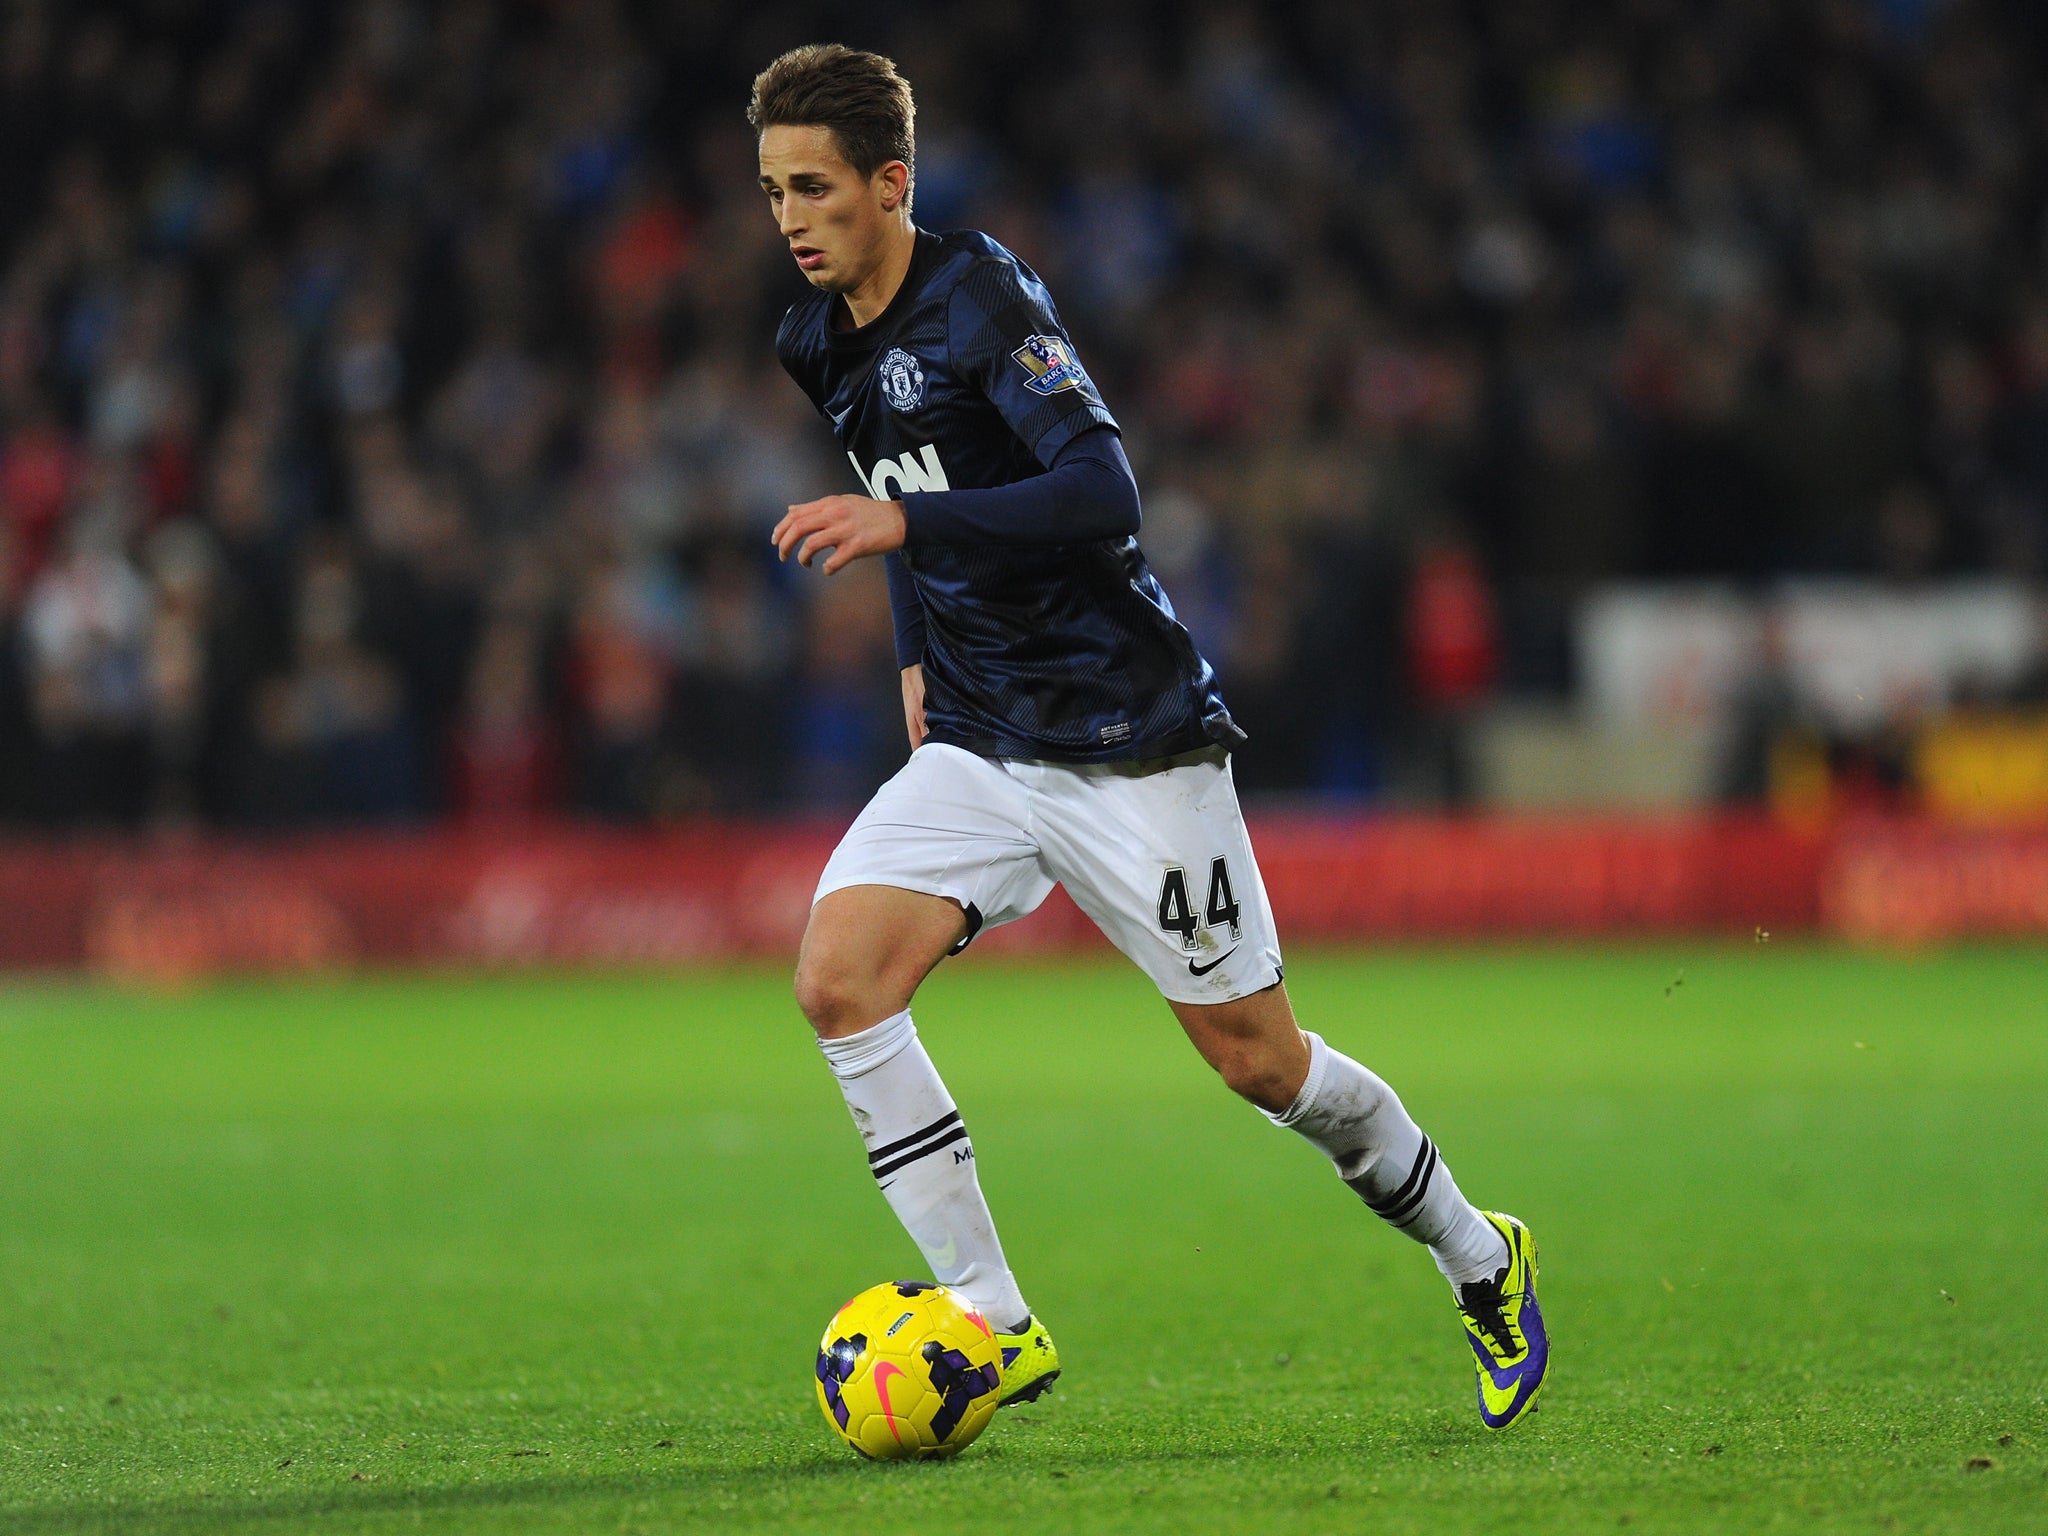 Manchester United winger Adnan Januzaj has been nominated for the BBC Young Sports Personality of the Year award